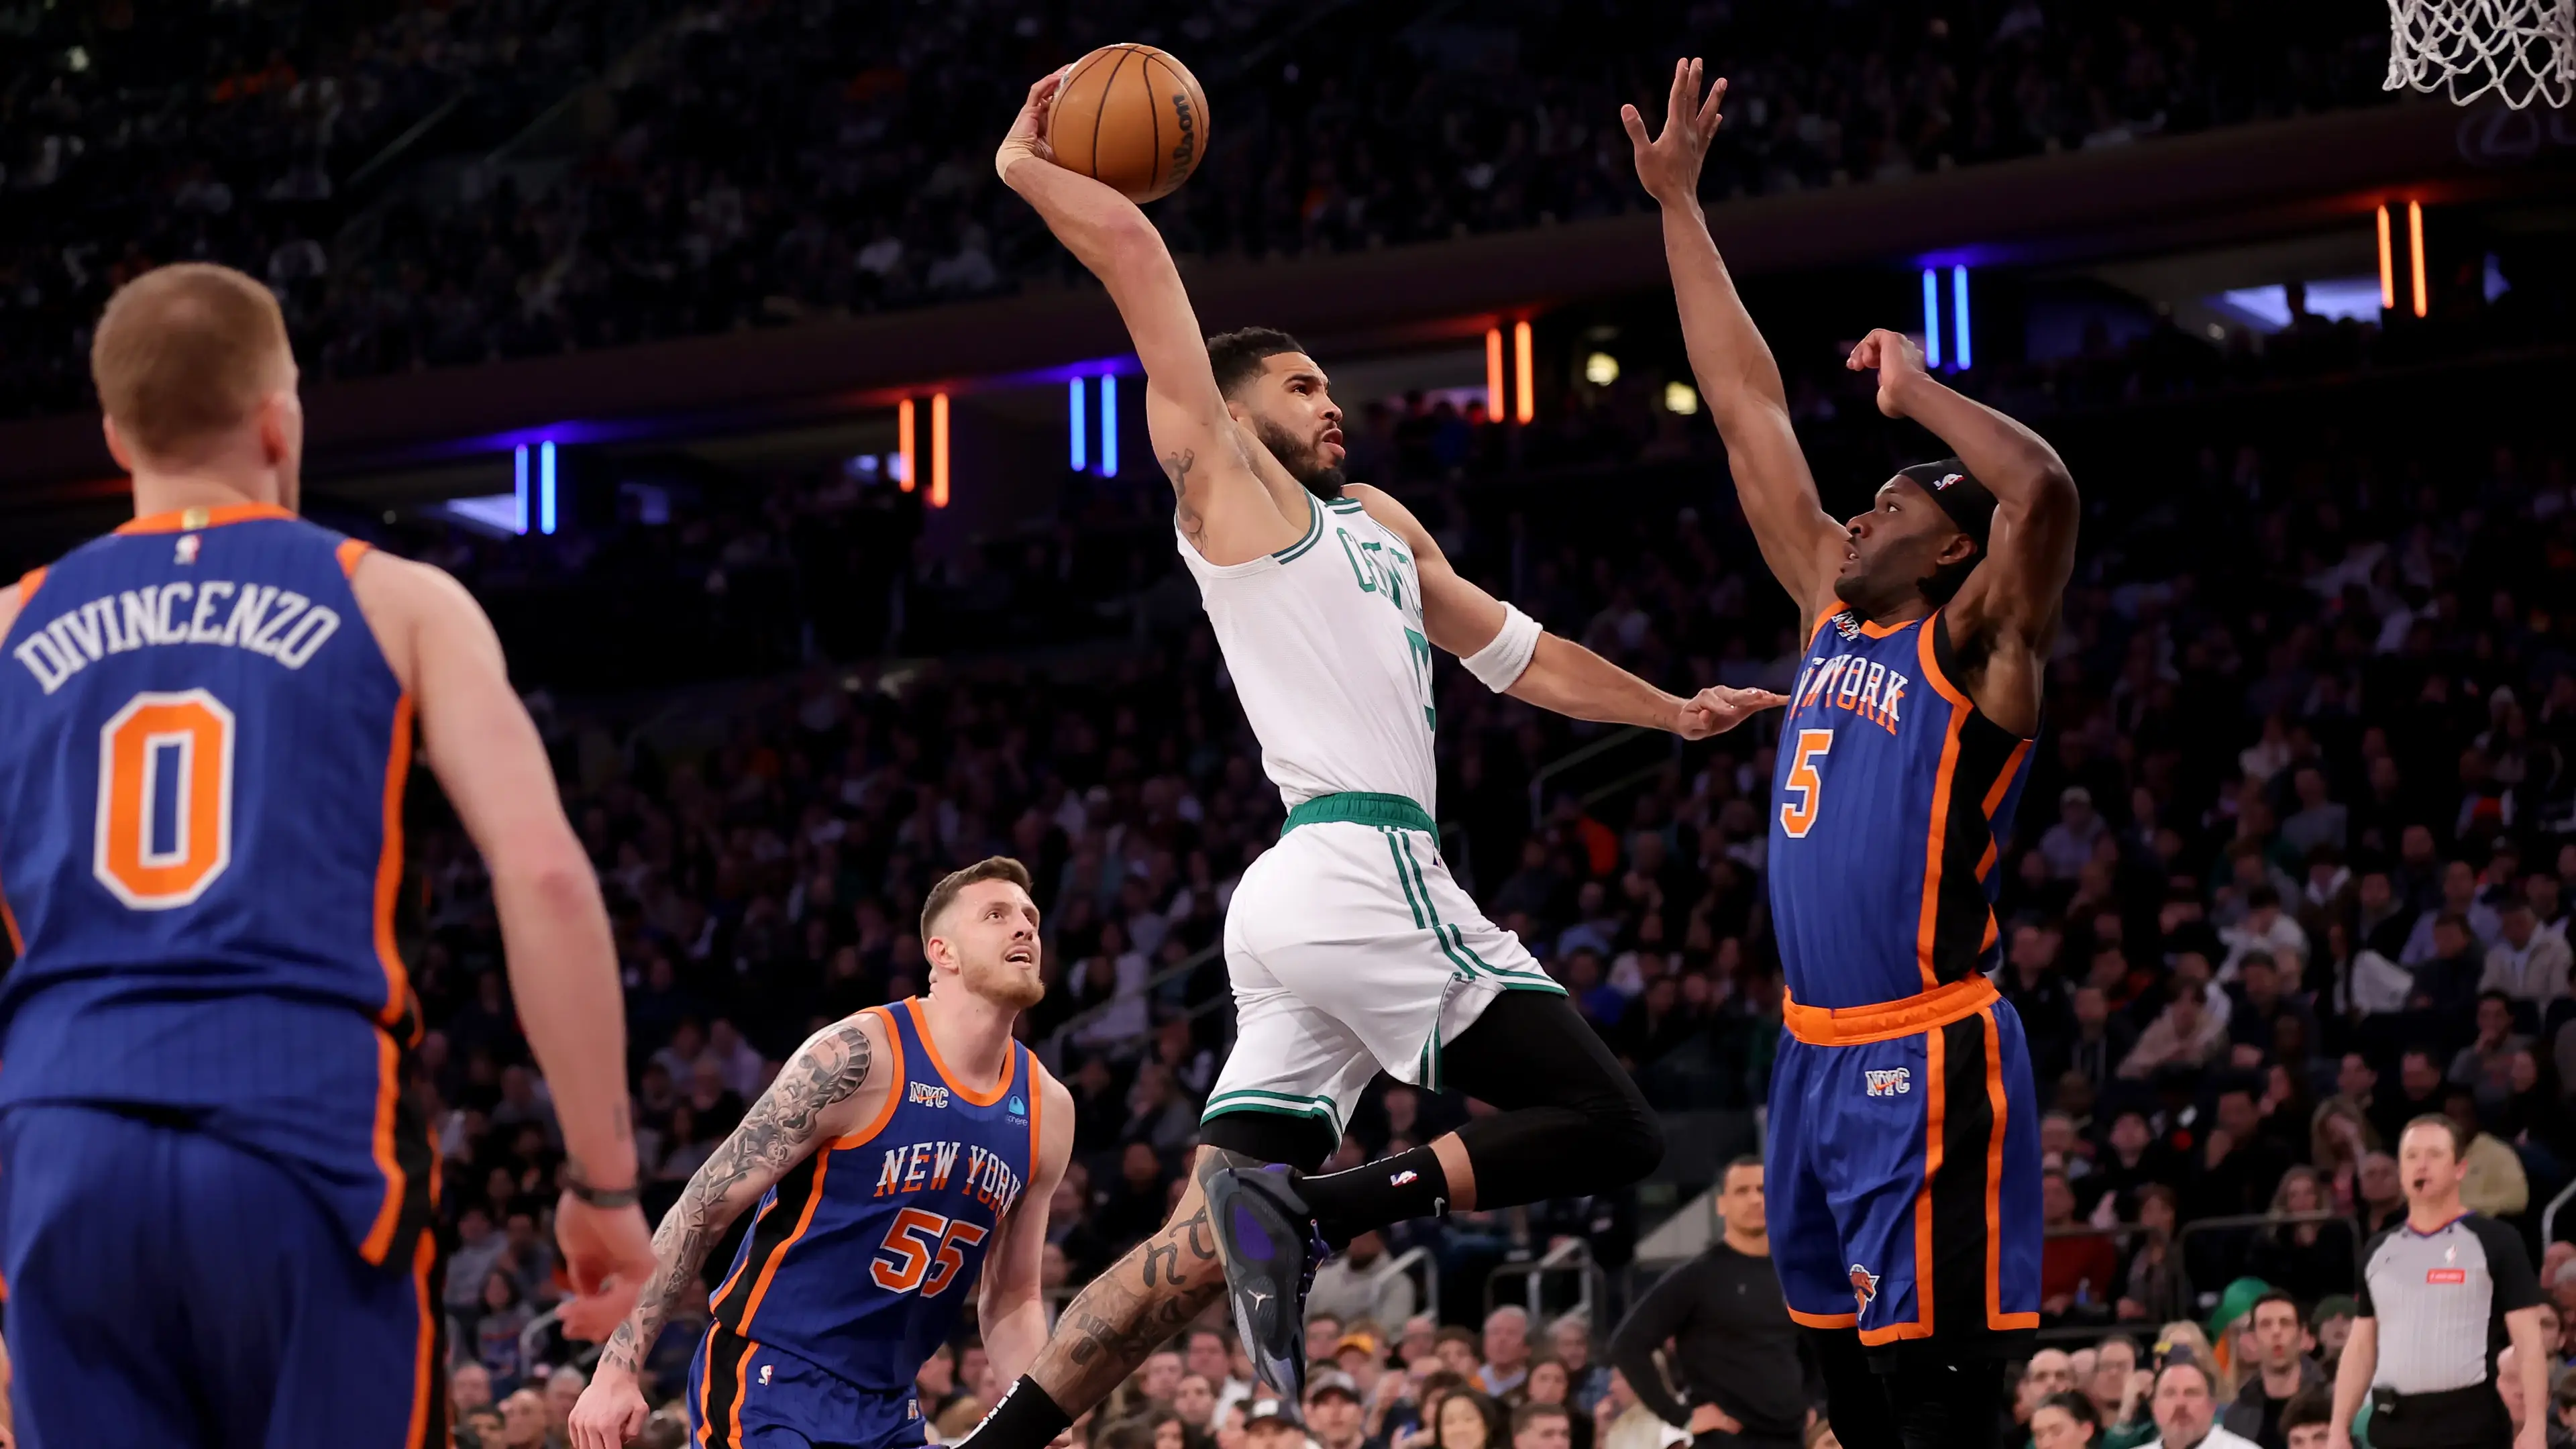 Boston Celtics forward Jayson Tatum (0) drives to the basket against New York Knicks forward Precious Achiuwa (5) and center Isaiah Hartenstein (55) and guard Donte DiVincenzo (0) during the first quarter at Madison Square Garden. / Brad Penner-USA TODAY Sports